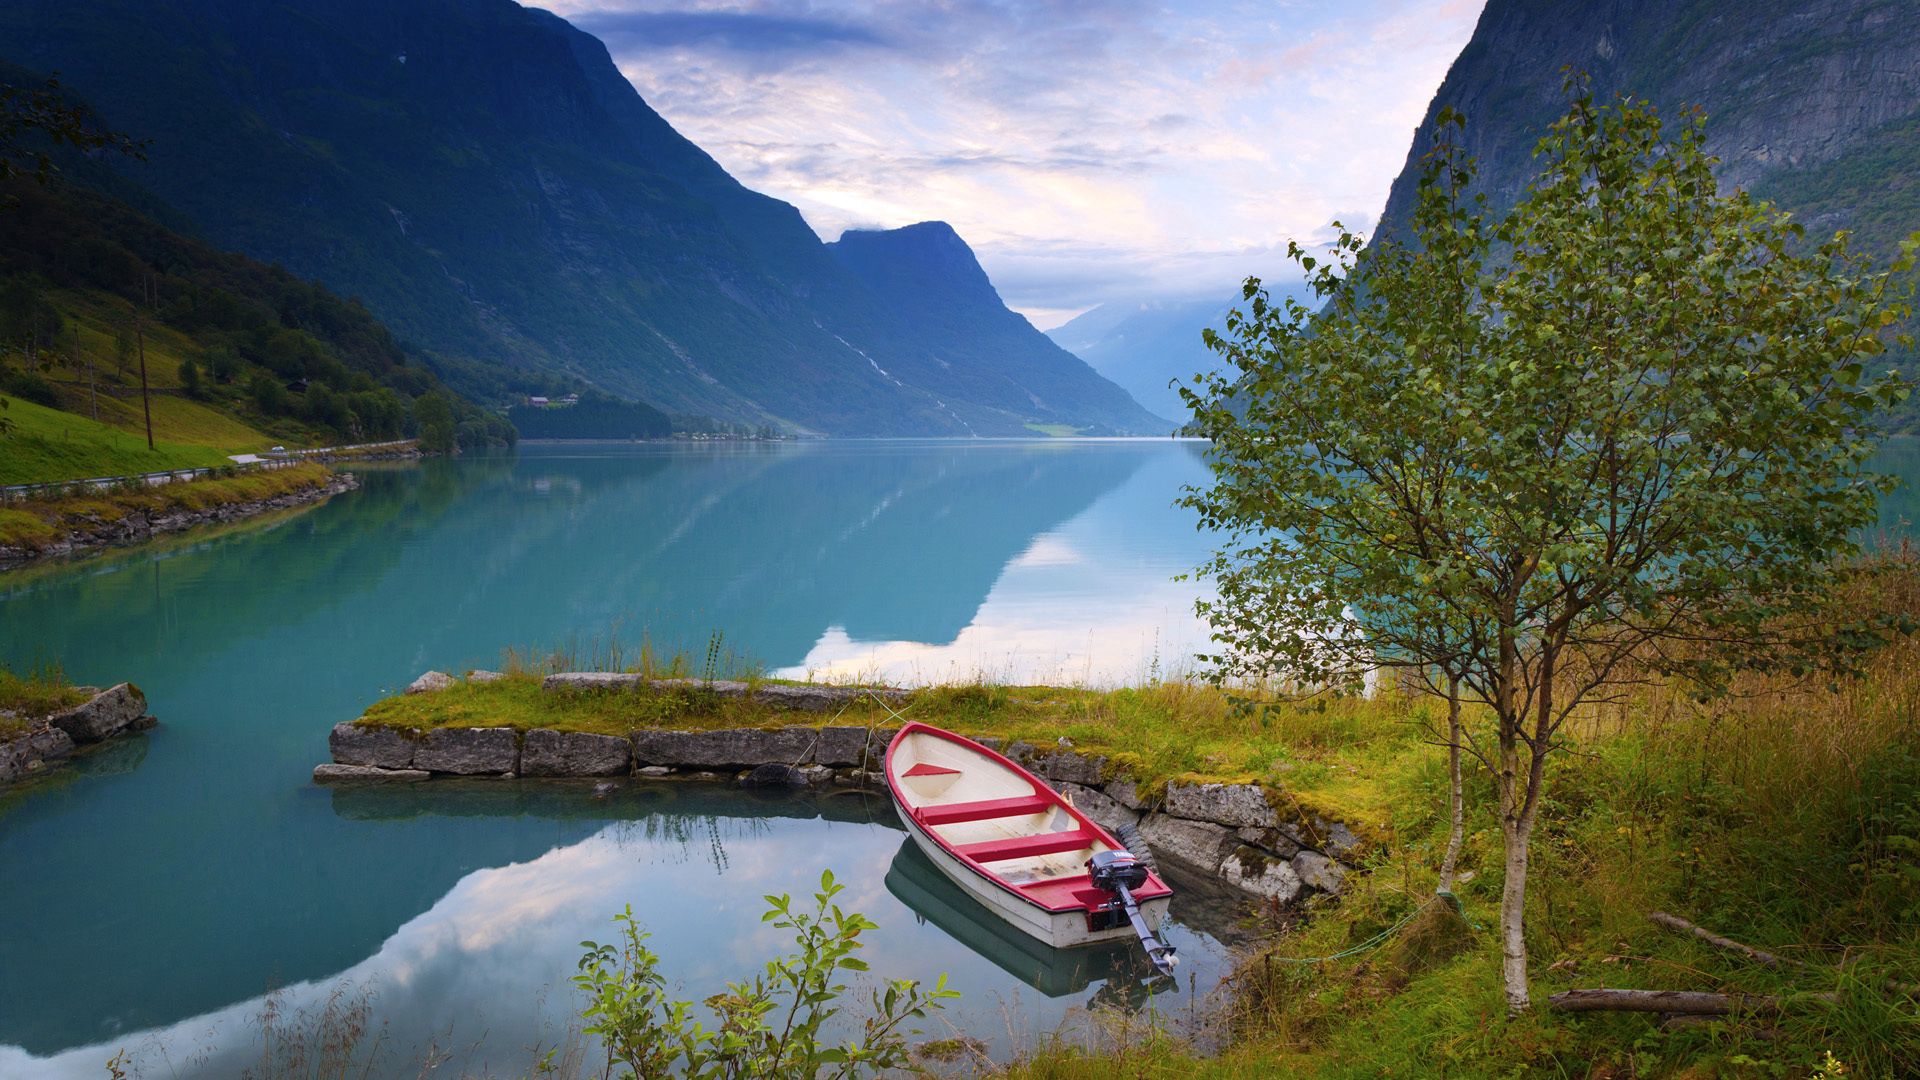 norway, lake, blue water, boat, nature, grass, stones, mountains, shore, bank